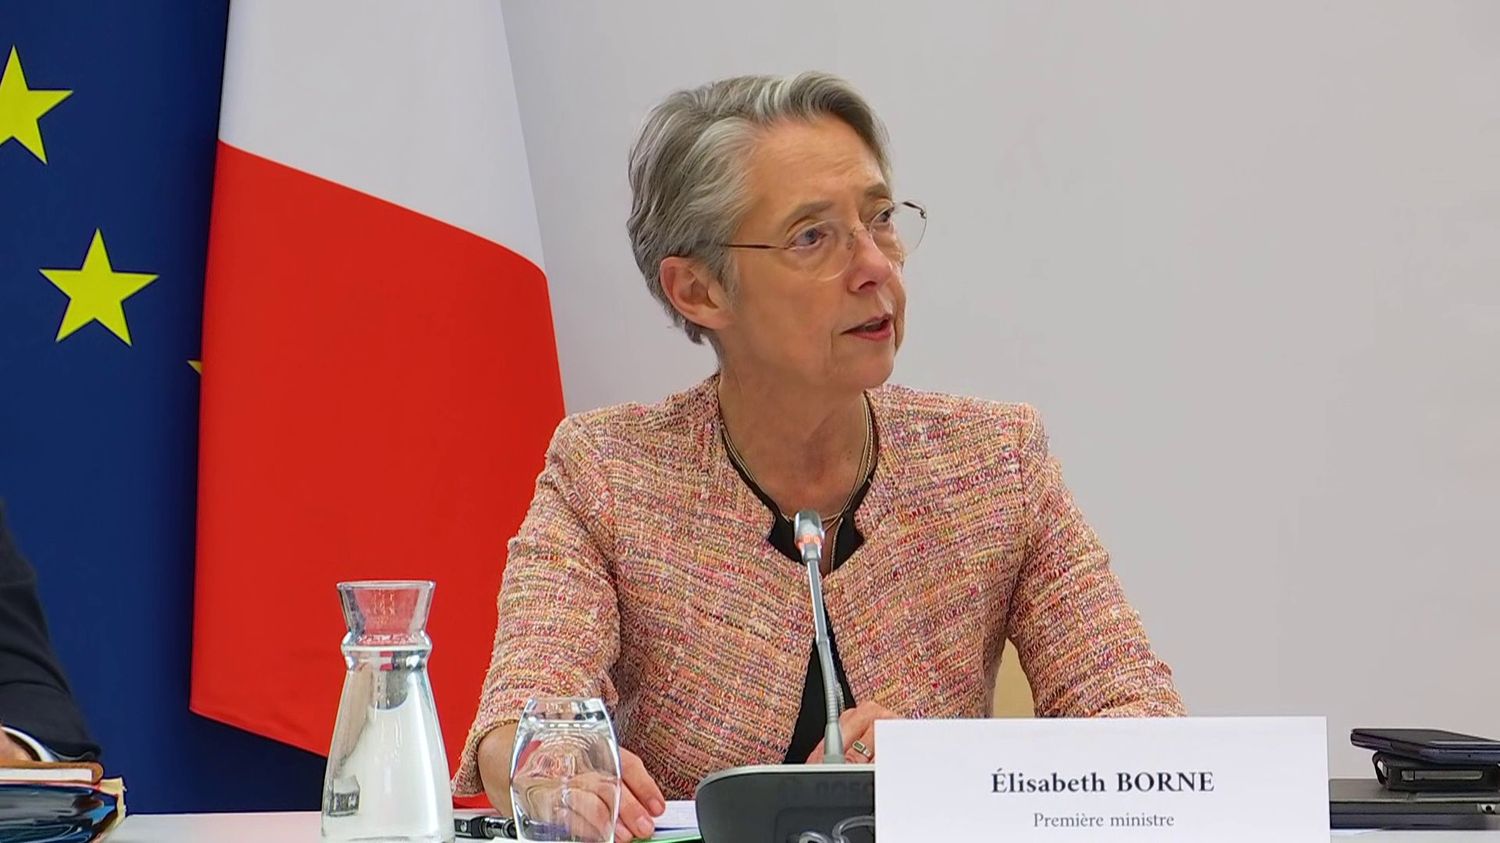 Climate: Elisabeth Borne lifts the veil on part of France's greenhouse gas emissions reduction plan by 2030
